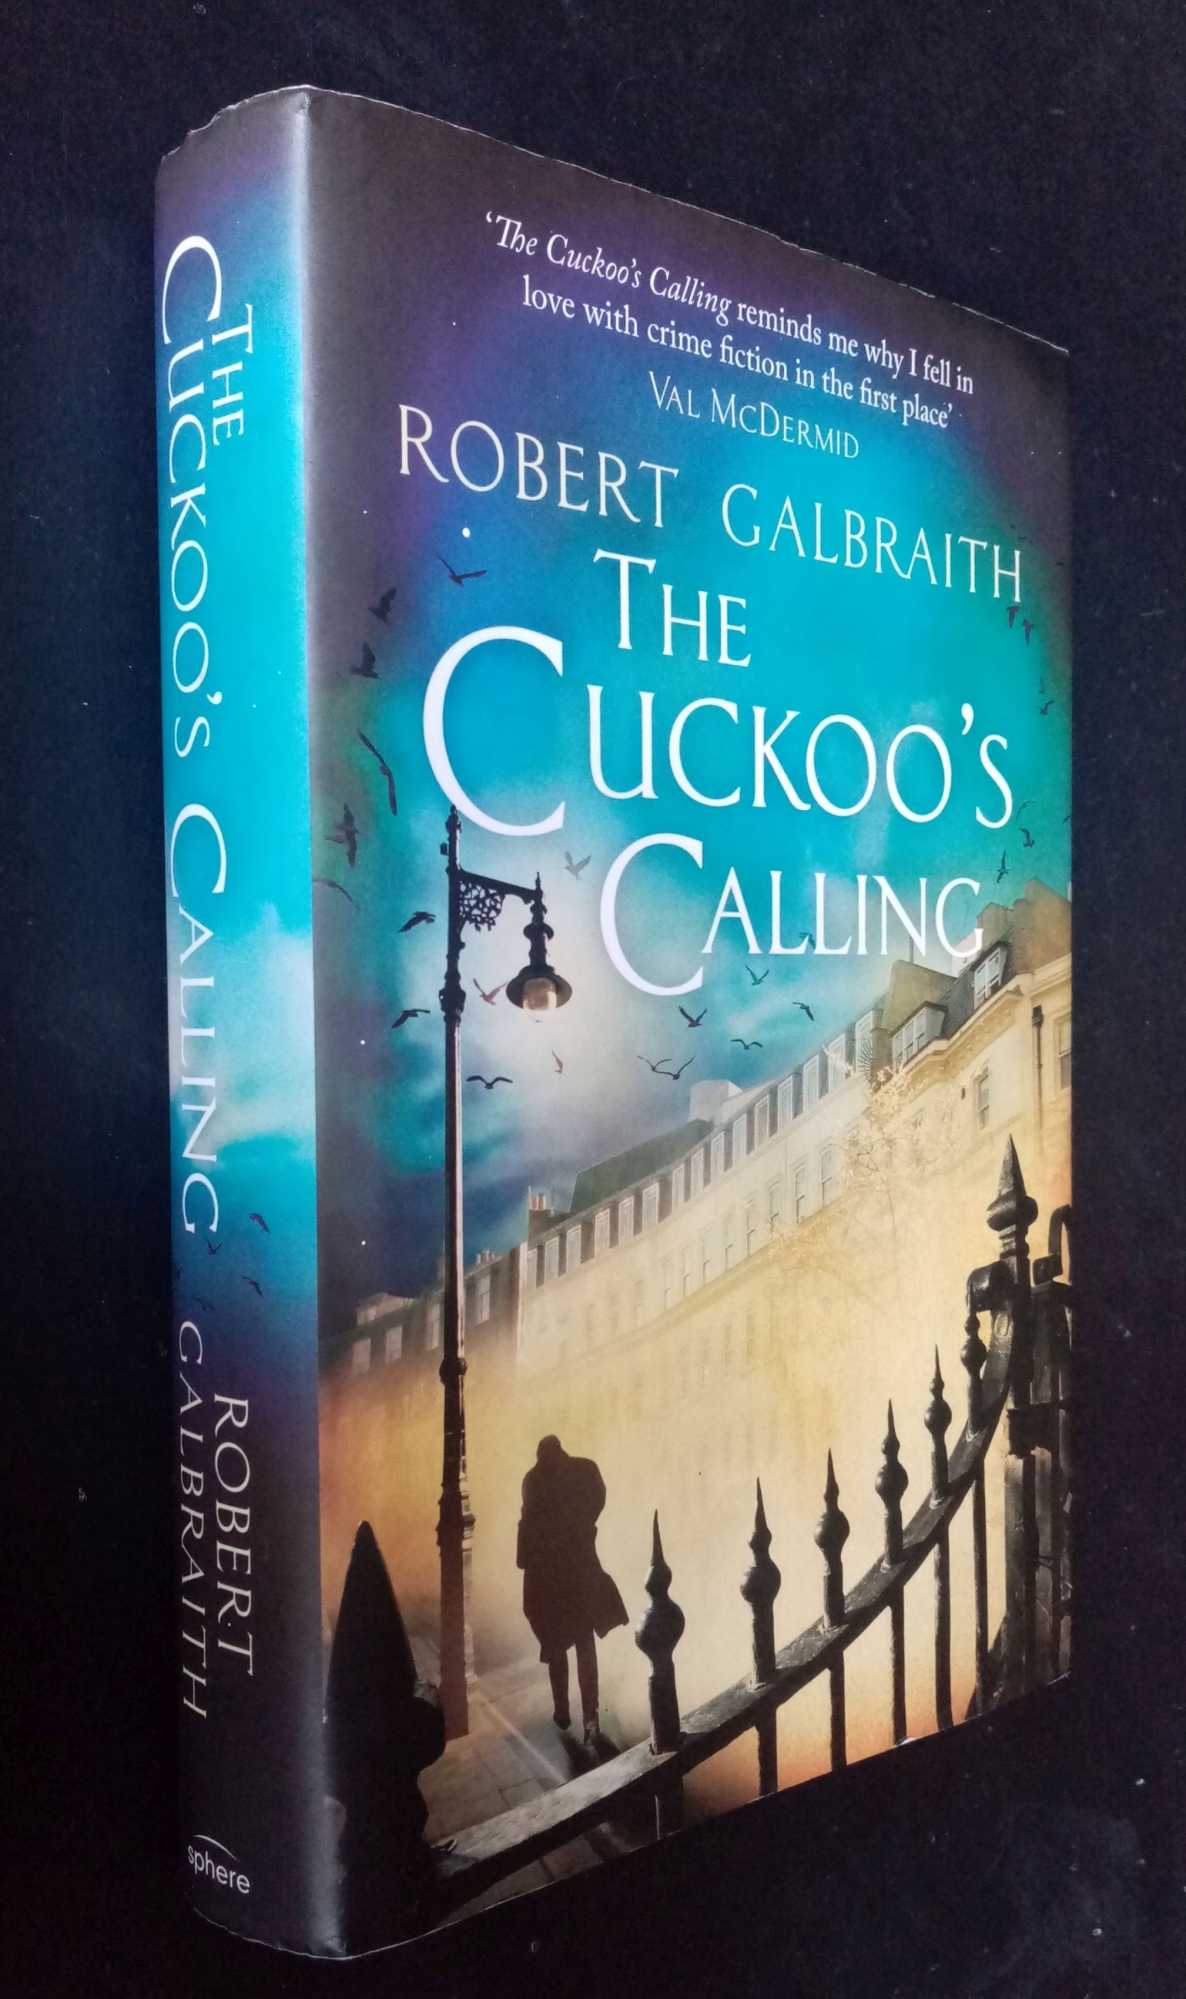 Robert Galbraith - The Cuckoo's Calling. First Edition Second printing.